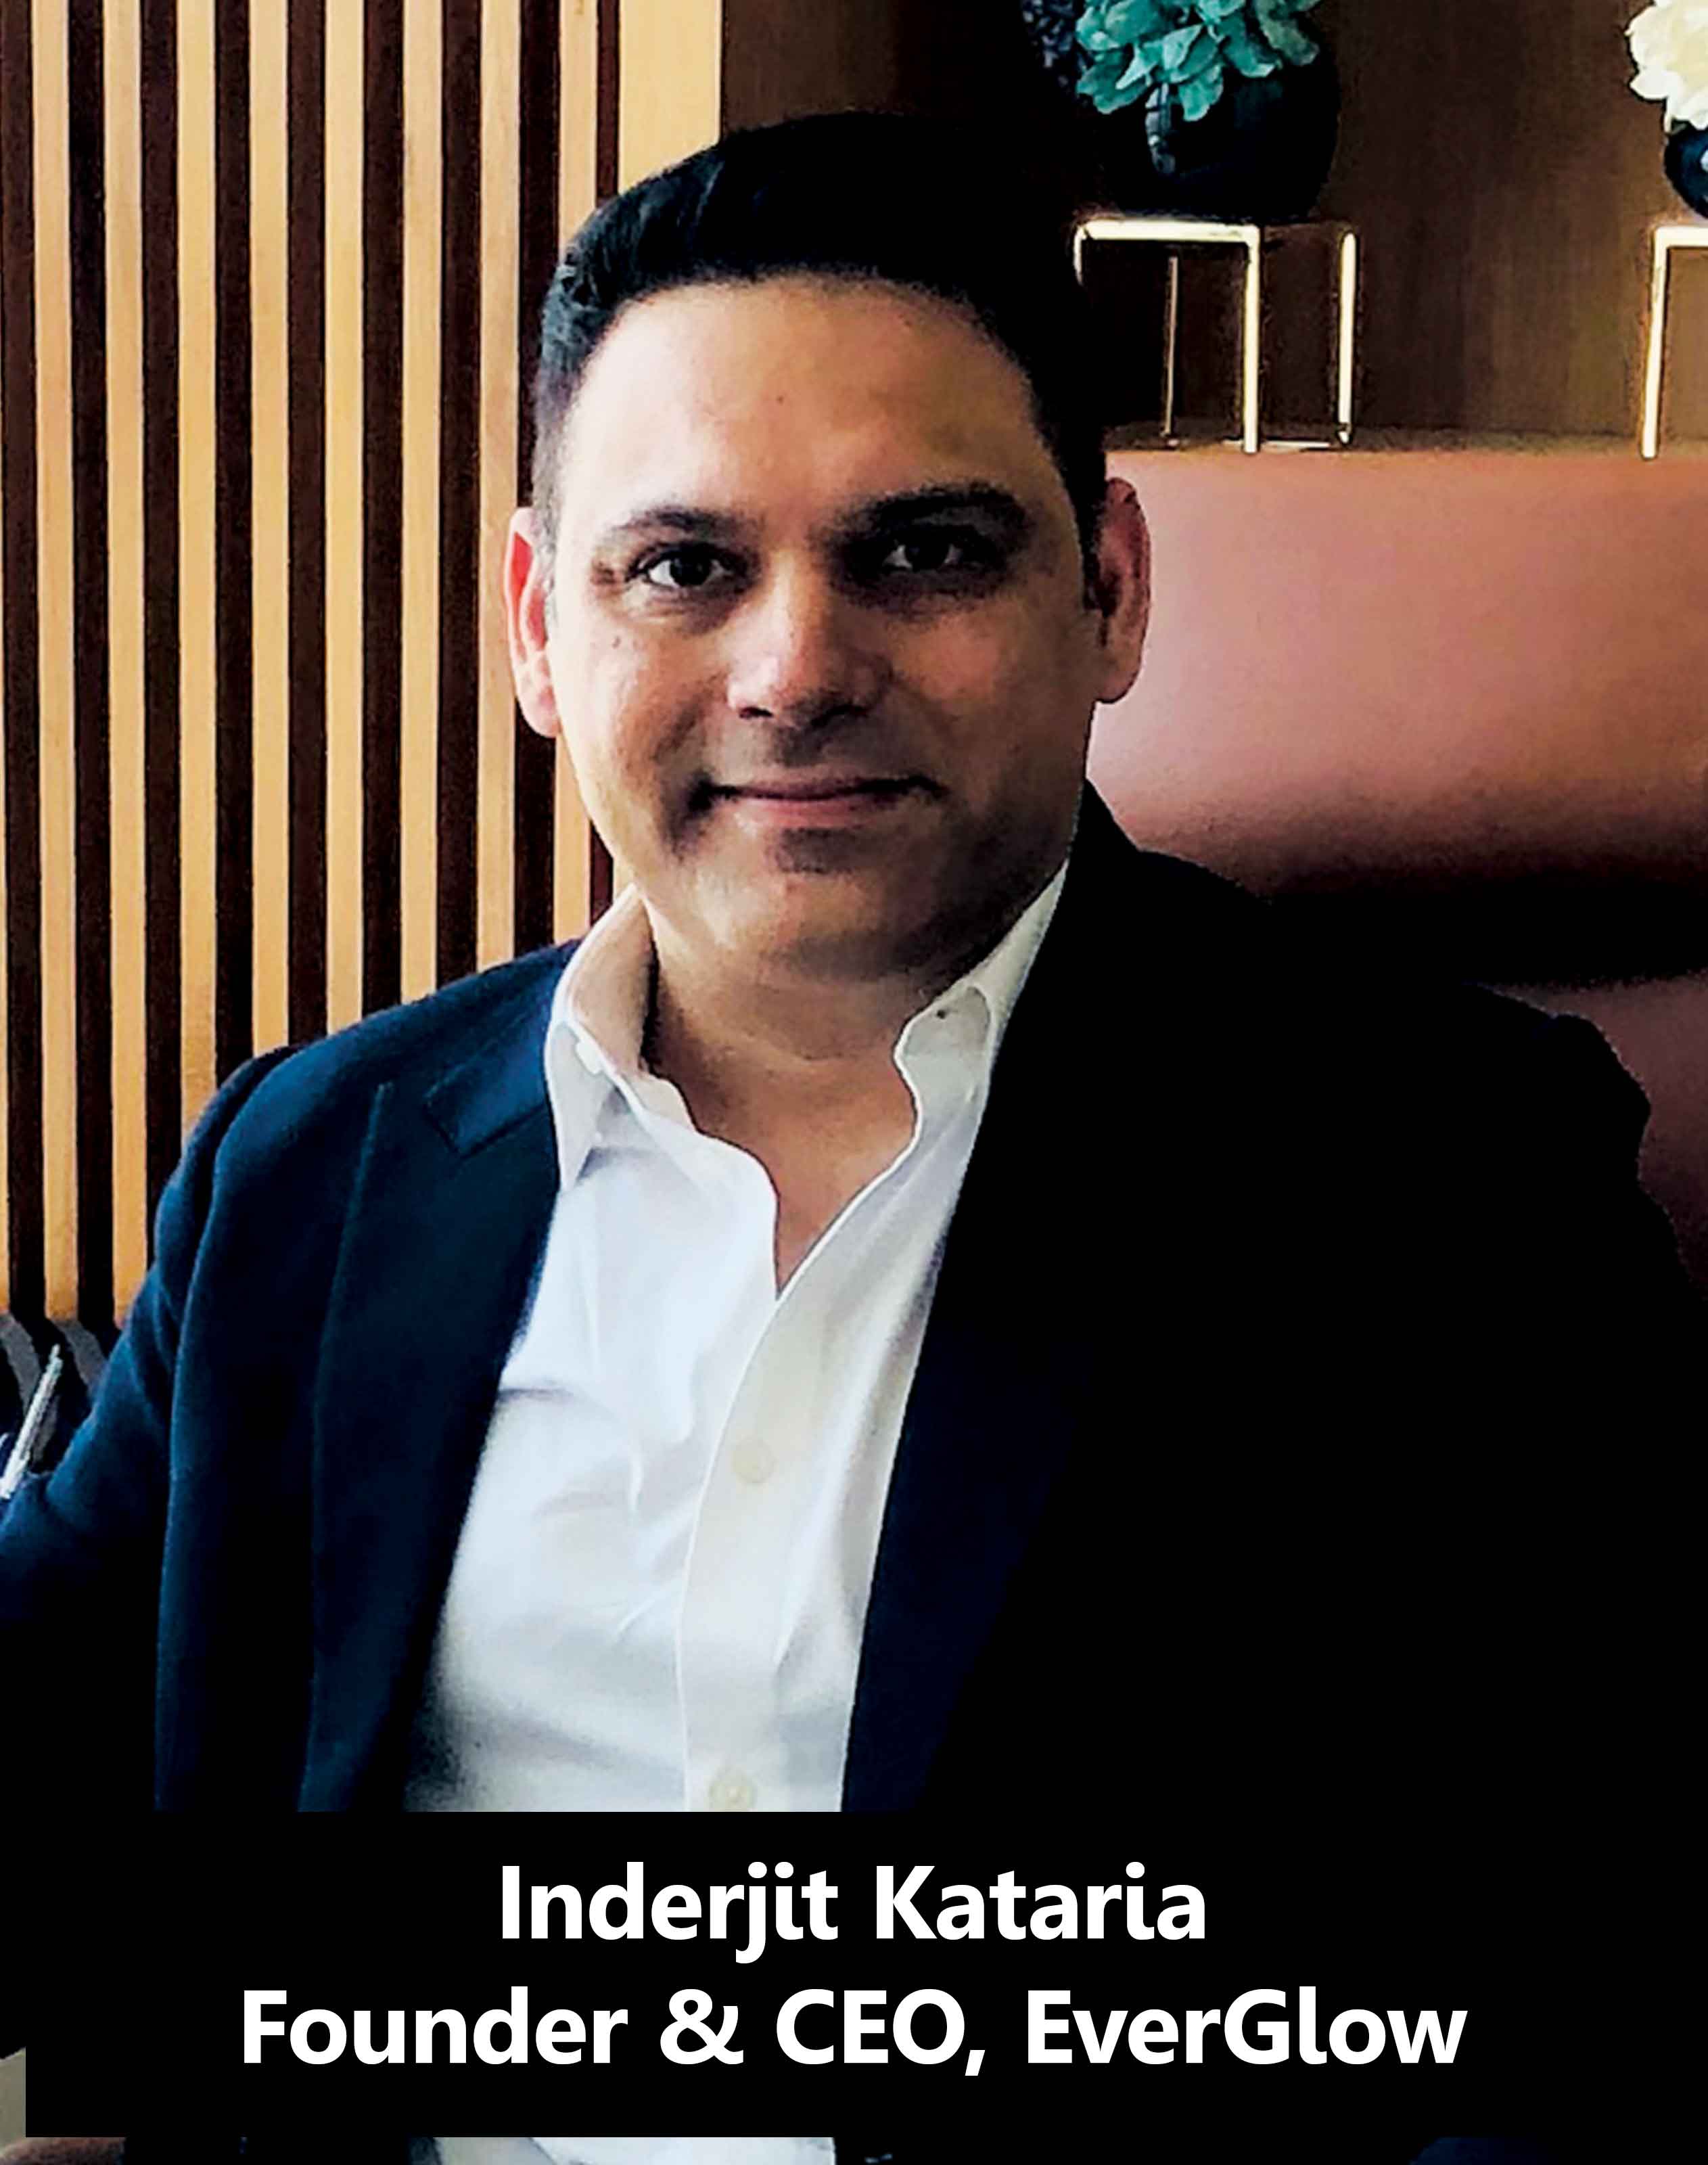 Inderjit Kataria, Founder and CEO, EverGlow